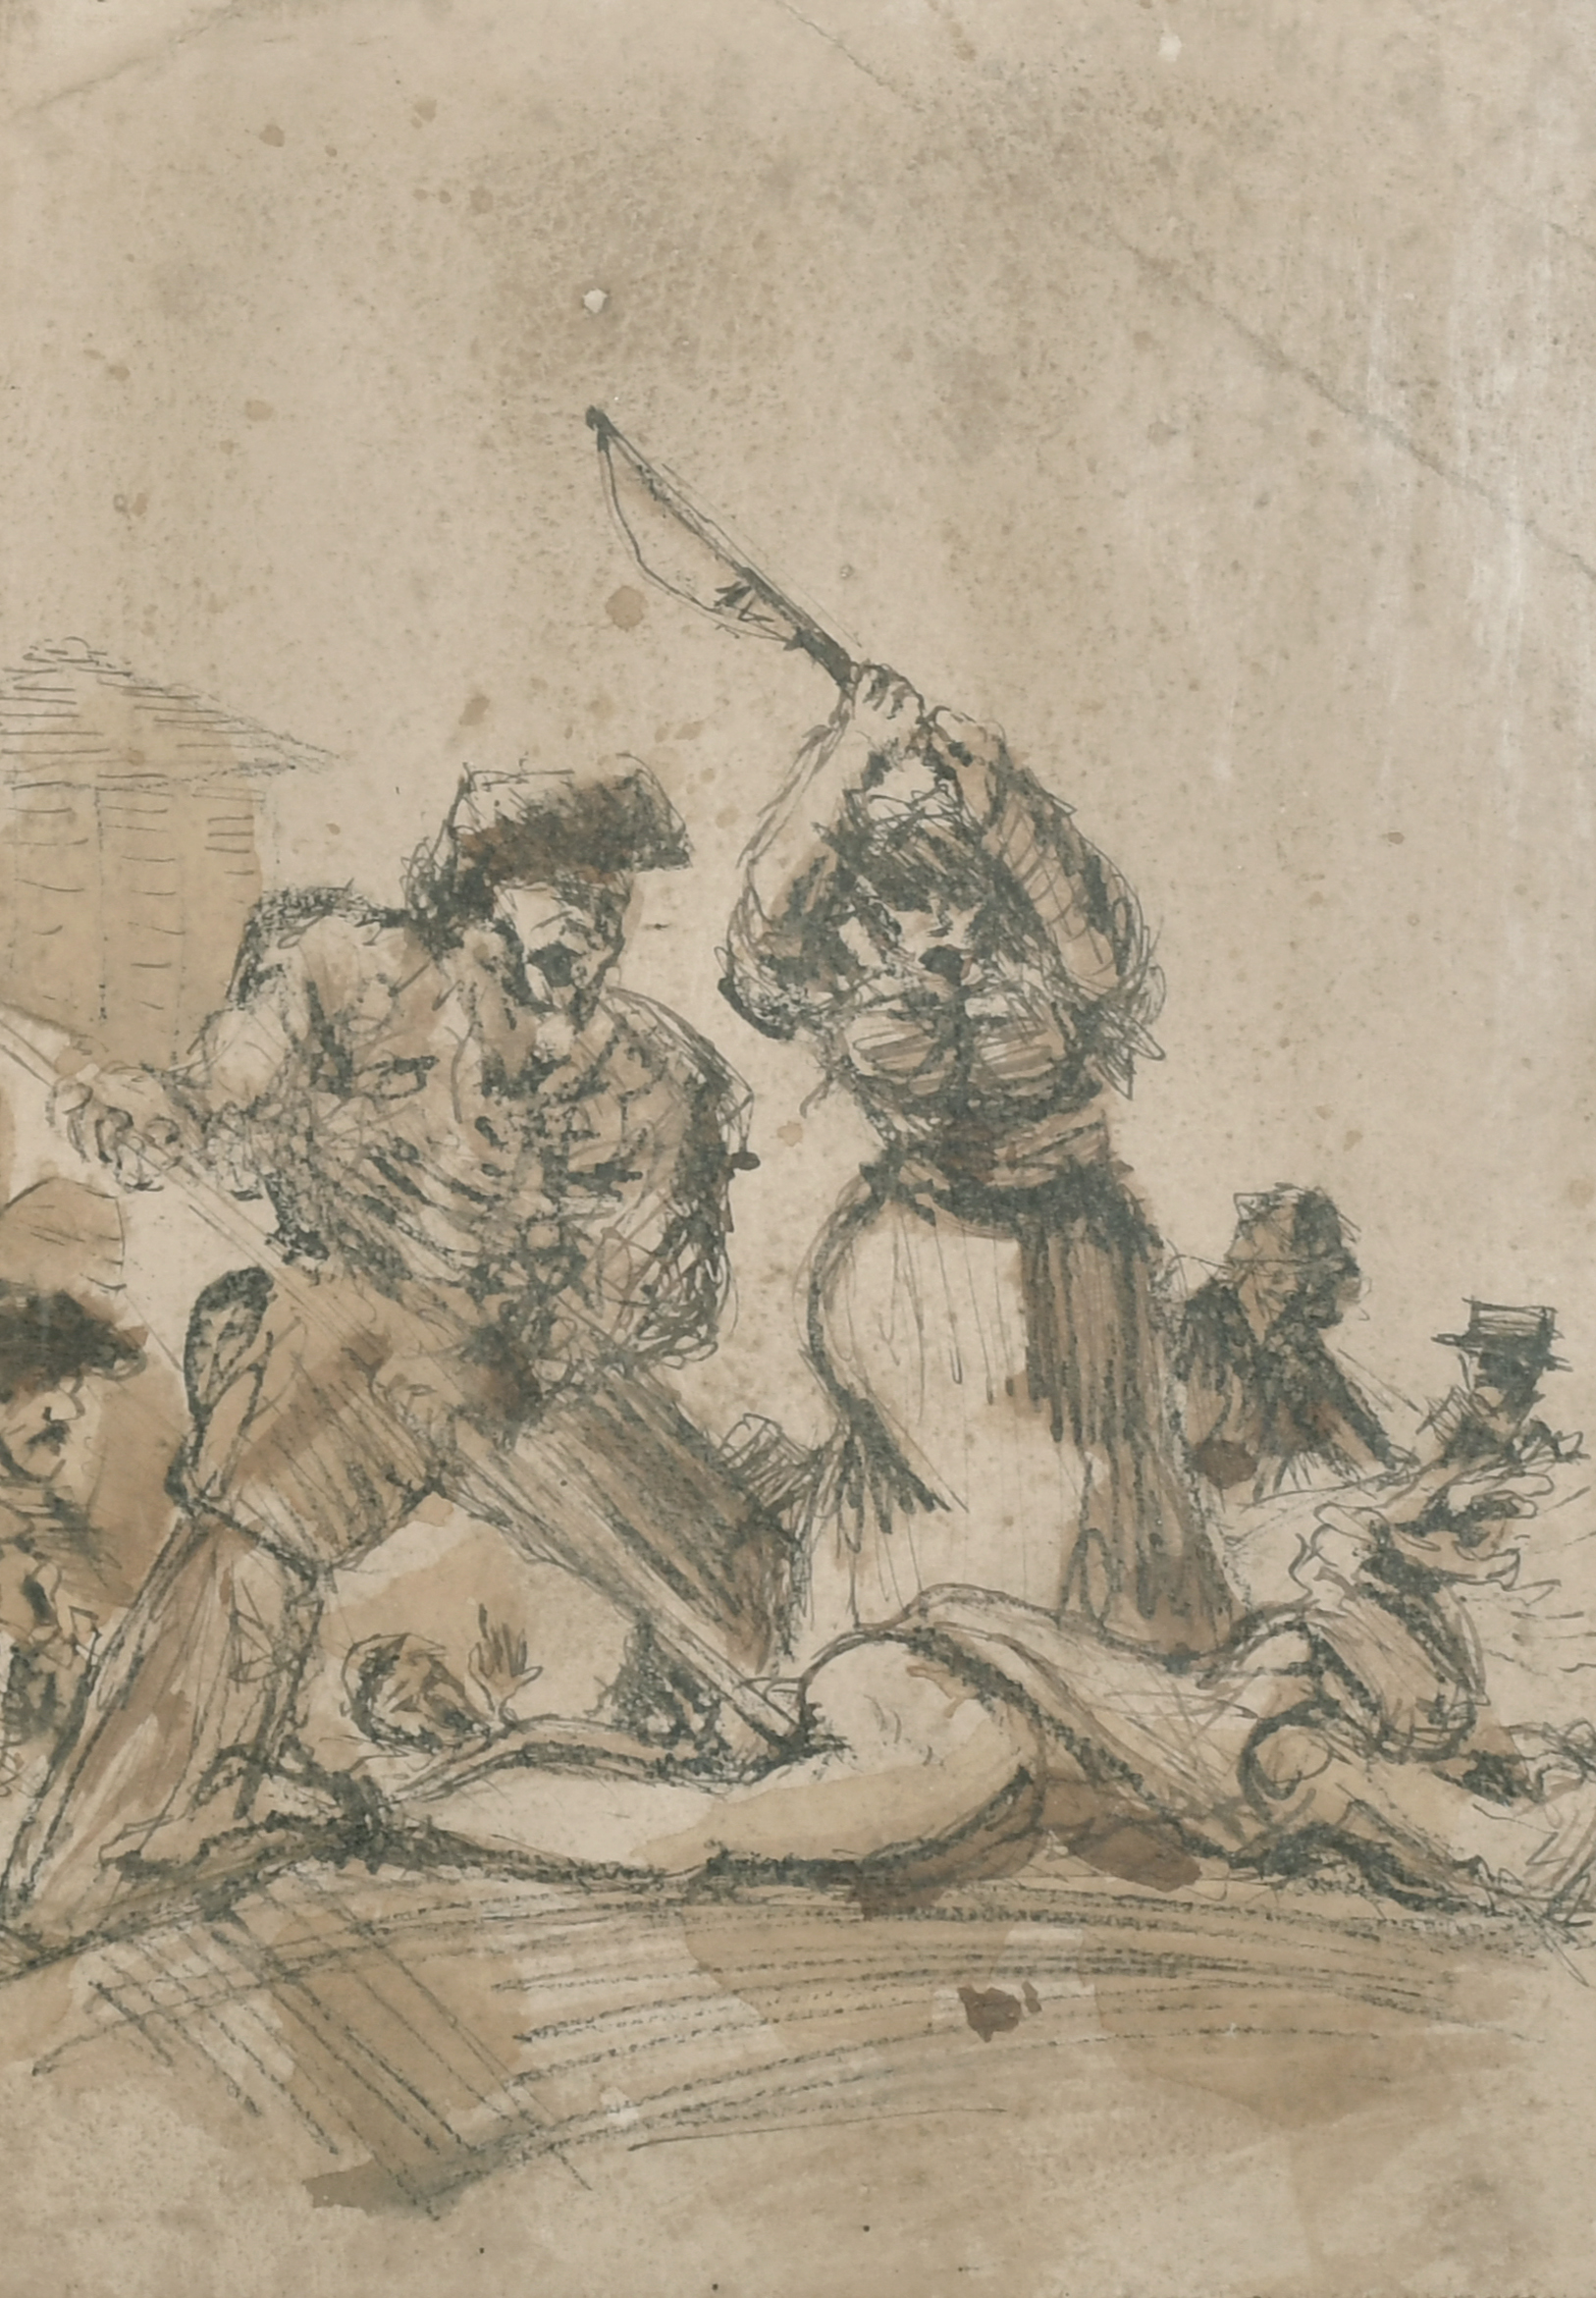 After Francisco de Goya (1746-1828) Spanish. "Disasters of War", Ink and Wash, 13.5" x 9" (34.3 x